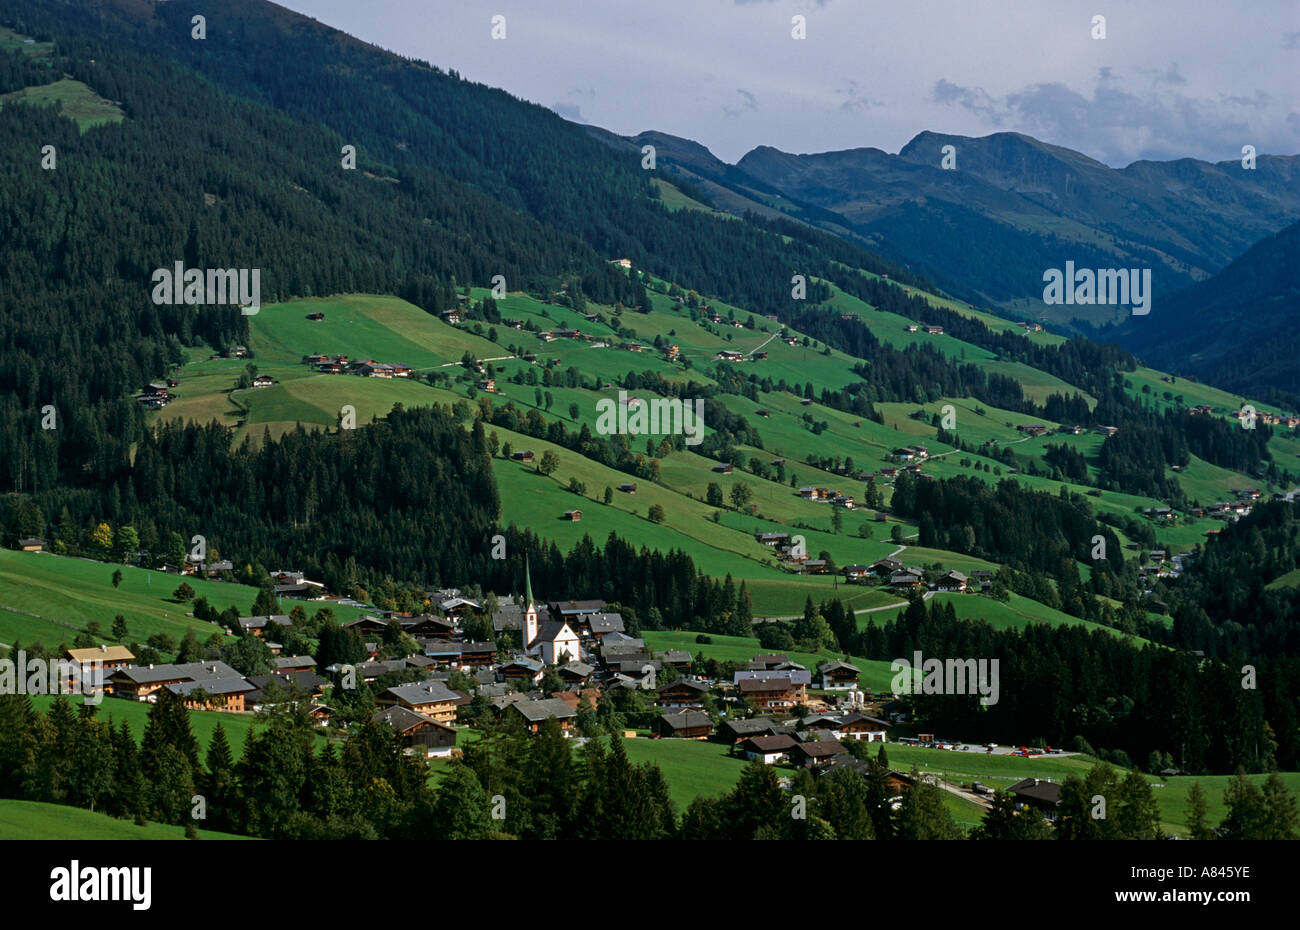 Austria. Alps.  Beautiful, manicured village of Alpbach. This is a major center for tourism,  walkers. Farming still important Stock Photo